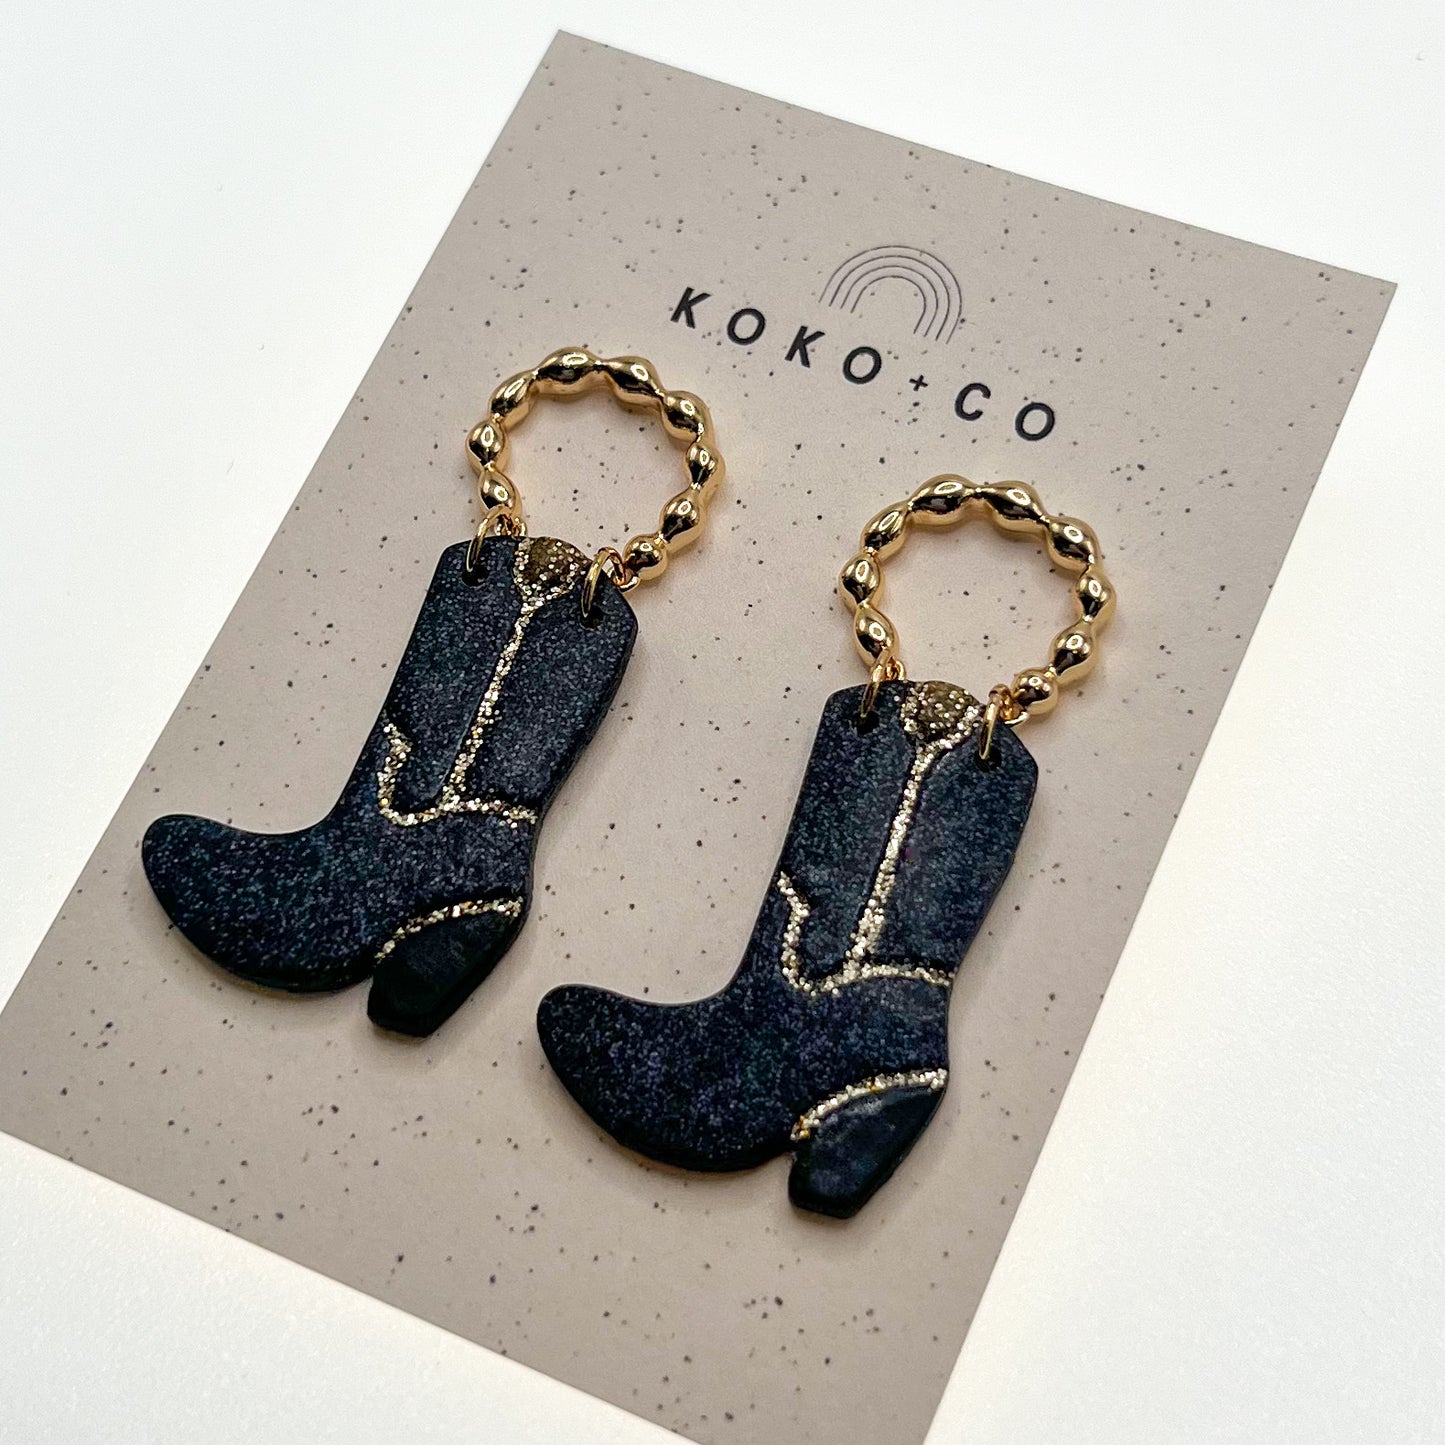 Cowgirl Boot Earrings in Black and Gold